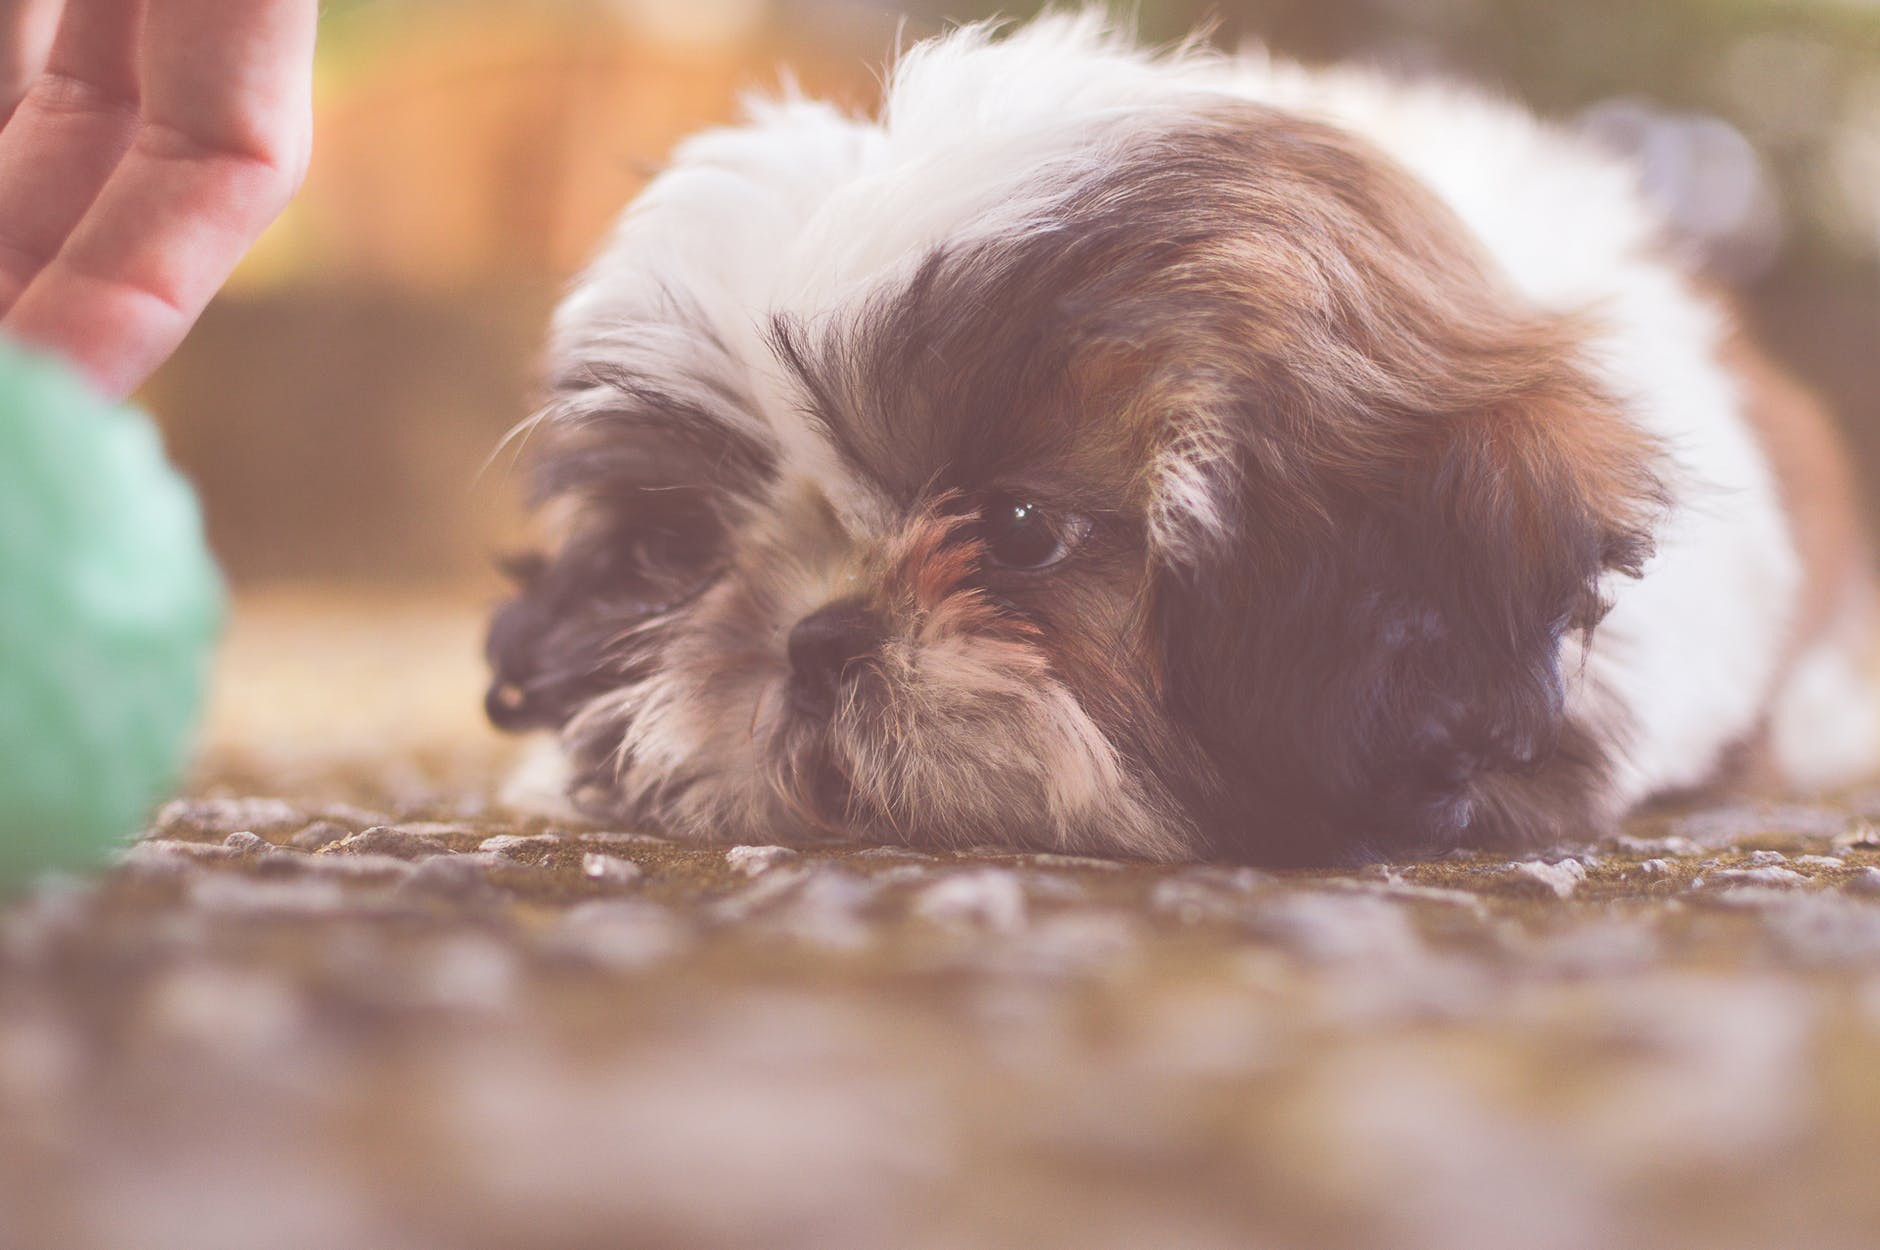 Dry skin in dogs is a common problem for many breeds of dog, including Shih Tzus and it often requires a little extra attention to keep your pup healthy. This article will offer tips on how to identify if your Shih Tzu has dry skin, what the symptoms are, why they occur, and what you can do about them. There will also be an explanation of some things that may cause dry skin in dogs such as allergies or poor diet. Finally, there will be recommendations from veterinarians for how to treat dry skin in your pet. How Does Dry Skin Affect Dogs Dogs' bodies are built to withstand rain, sleet, snow and wind. But this doesn't mean that dogs don't get dry skin. It's not just an issue for people! Shih Tzus can suffer from itchy or flaky skin just like humans. If you notice any changes in your doggie's skin -- such as redness, flakes, excessive scratching, or irritation -- there could be a problem with their diet or environment that needs to be addressed right away before they develop a more serious health concern related to the dry skin Common symptoms of dry skin in dogs ● Itchy skin ● Dandruff ● Flaky skin ● Barking and licking their paws excessively ● Excessive scratching ● Red, flaking, or swollen skin ● Crusty rashes If you notice any of these symptoms, your Shih Tzu may have dry skin. A vet can help determine the kind of treatment required for it -- from dietary changes to medication and other methods. What are the Causes of Dry Skin in Dogs Dry skin in dogs is often caused by environmental factors. The best way to prevent this problem is to avoid exposing your pet to any known dry skin triggers. Some things that can cause dog dry skin include: extreme weather conditions, hot and humid environments, certain types of shampoos, excess bathing, the wrong diet or a grain-free diet that lacks vital moisture-boosting ingredients. How to Prevent and Treat Shih Tzu Dry Skin ● Seek treatment from your veterinarian to determine if your dog's dry skin is caused by an underlying medical condition ● Limit time outdoors during extreme weather conditions to avoid potential environmental triggers ● Bathe your pet with mild dog shampoo to avoid stripping away natural oils ● Moisturize their coats several times per day with food-grade or baby-mild lotion ● Increase the moisture content in their diet through additional omega 3 fatty acids, high-quality proteins and increased amounts of healthy fats; you can do this by adding more fish oil for dogs into their meal plan. Tips for Treating Your Pet's Dry, Itchy Fur ● Use dog shampoo for dry skin to avoid irritating their already sensitive skin ● Apply conditioner after you bathe your pet, but before the final rinse. Never apply conditioner to a wet coat ● Let the coat dry naturally instead of using a hair dryer (even on low heat) to avoid irritating their skin further ● Gently rub in dog lotion for puppies with extra moisture content into your pup's fur while it is still damp; this will lock in that moisture and help them feel better fast! If you notice some discomfort or irritation when touching your pup's skin, see if he appears unhappy when you go near his belly, neck, or paws. If so, make an appointment with your vet right away. Common Products That Help Relieve Canine Eczema ● Apple cider vinegar for dogs ● Coconut oil ● Herbal home remedies to reduce inflammation and itchiness, such as comfrey ointment, calendula cream or aloe vera gel. Check with your vet before trying any herbal treatments on your pet to make sure they will not interfere with their treatment plan. As you can see from this article, dry skin in dogs is a common issue that can happen at any time during a dog's life. However, it's important to take the proper preventative measures during the winter months to ensure that your Shih Tzu has a comfortable and healthy coat throughout their entire life! Conclusion Dry skin is one of the most common problems for pets, but it's also very easy to treat. There are many different types of dry dog skin treatments available, so you should be able to find something that works best for your pet. If you have any questions about what products would work best on your particular breed or type of animal, ask a veterinarian! They're experts in all things furry and four-legged. The next time your pup needs some hydration treatment at home, try out these tips from our blog post - they just might do the trick.